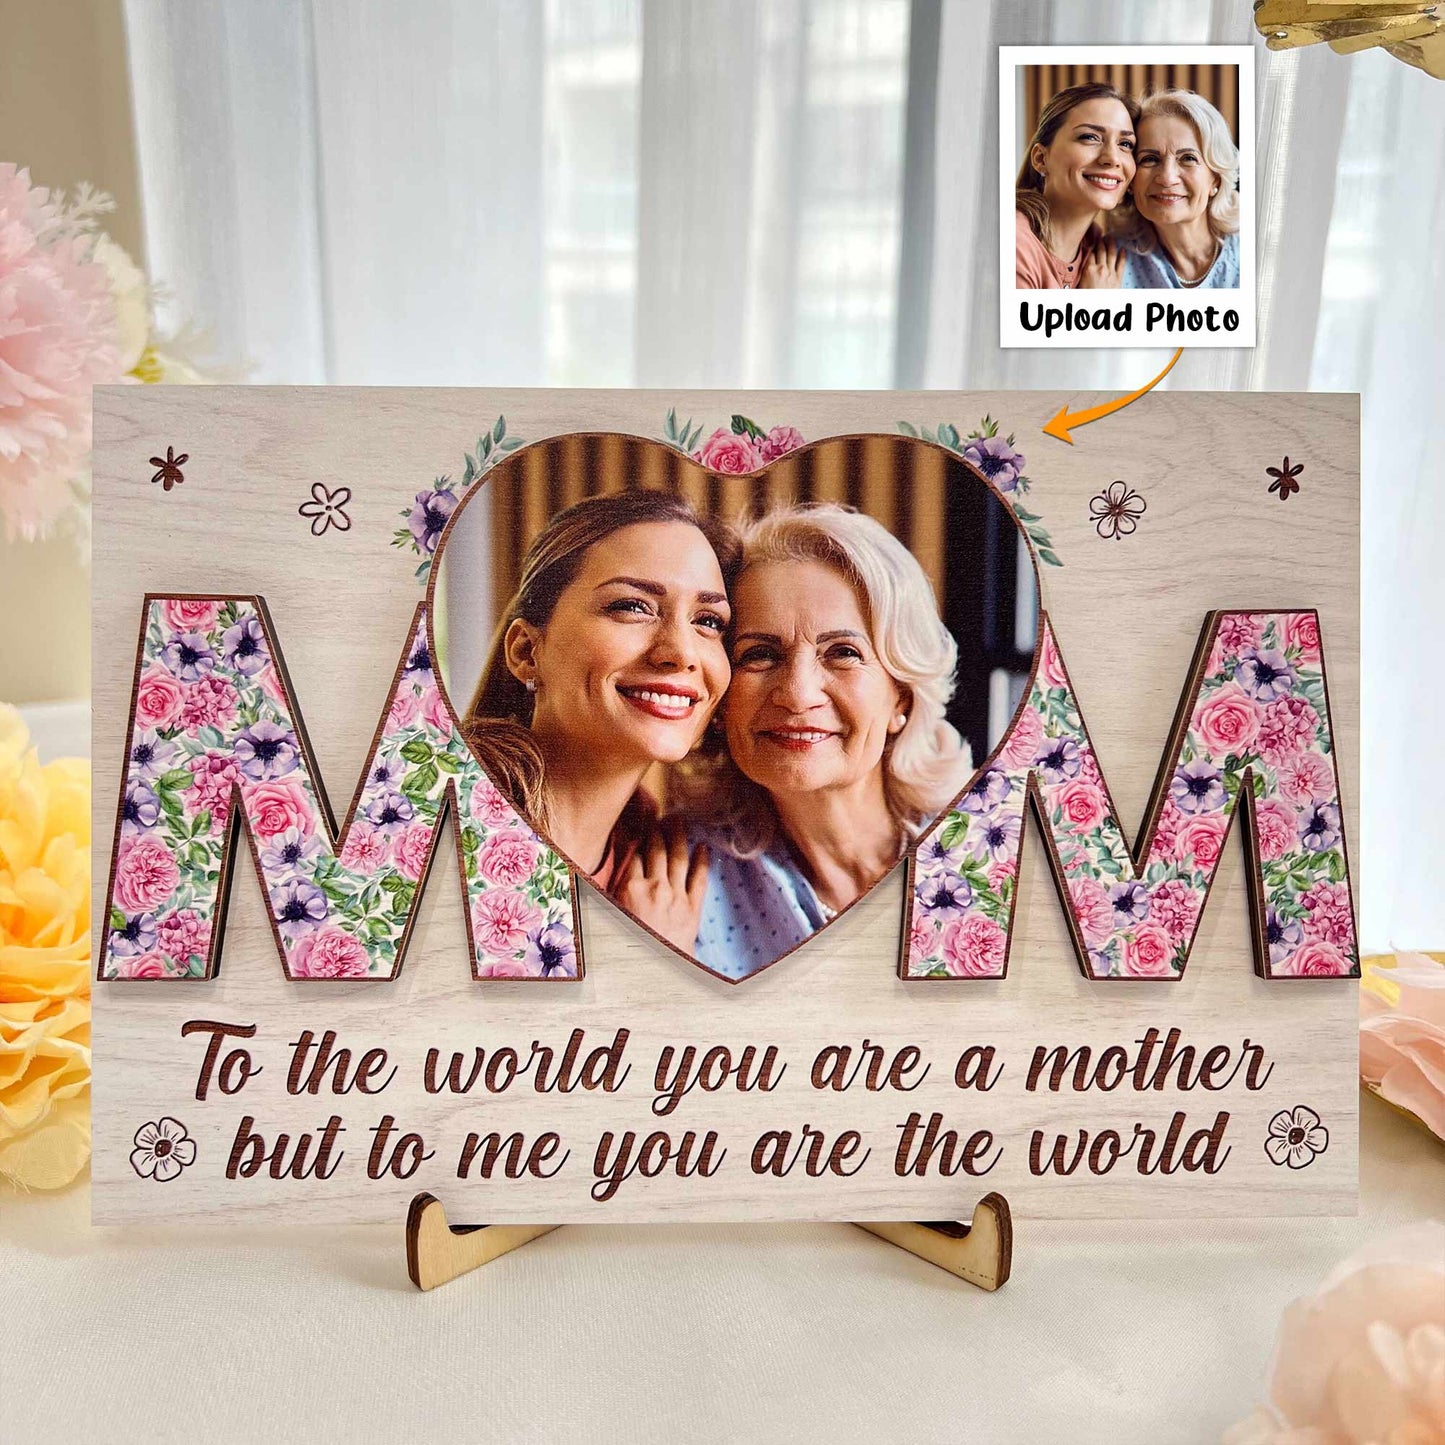 To Us You Are The World - Personalized Wooden Photo Plaque